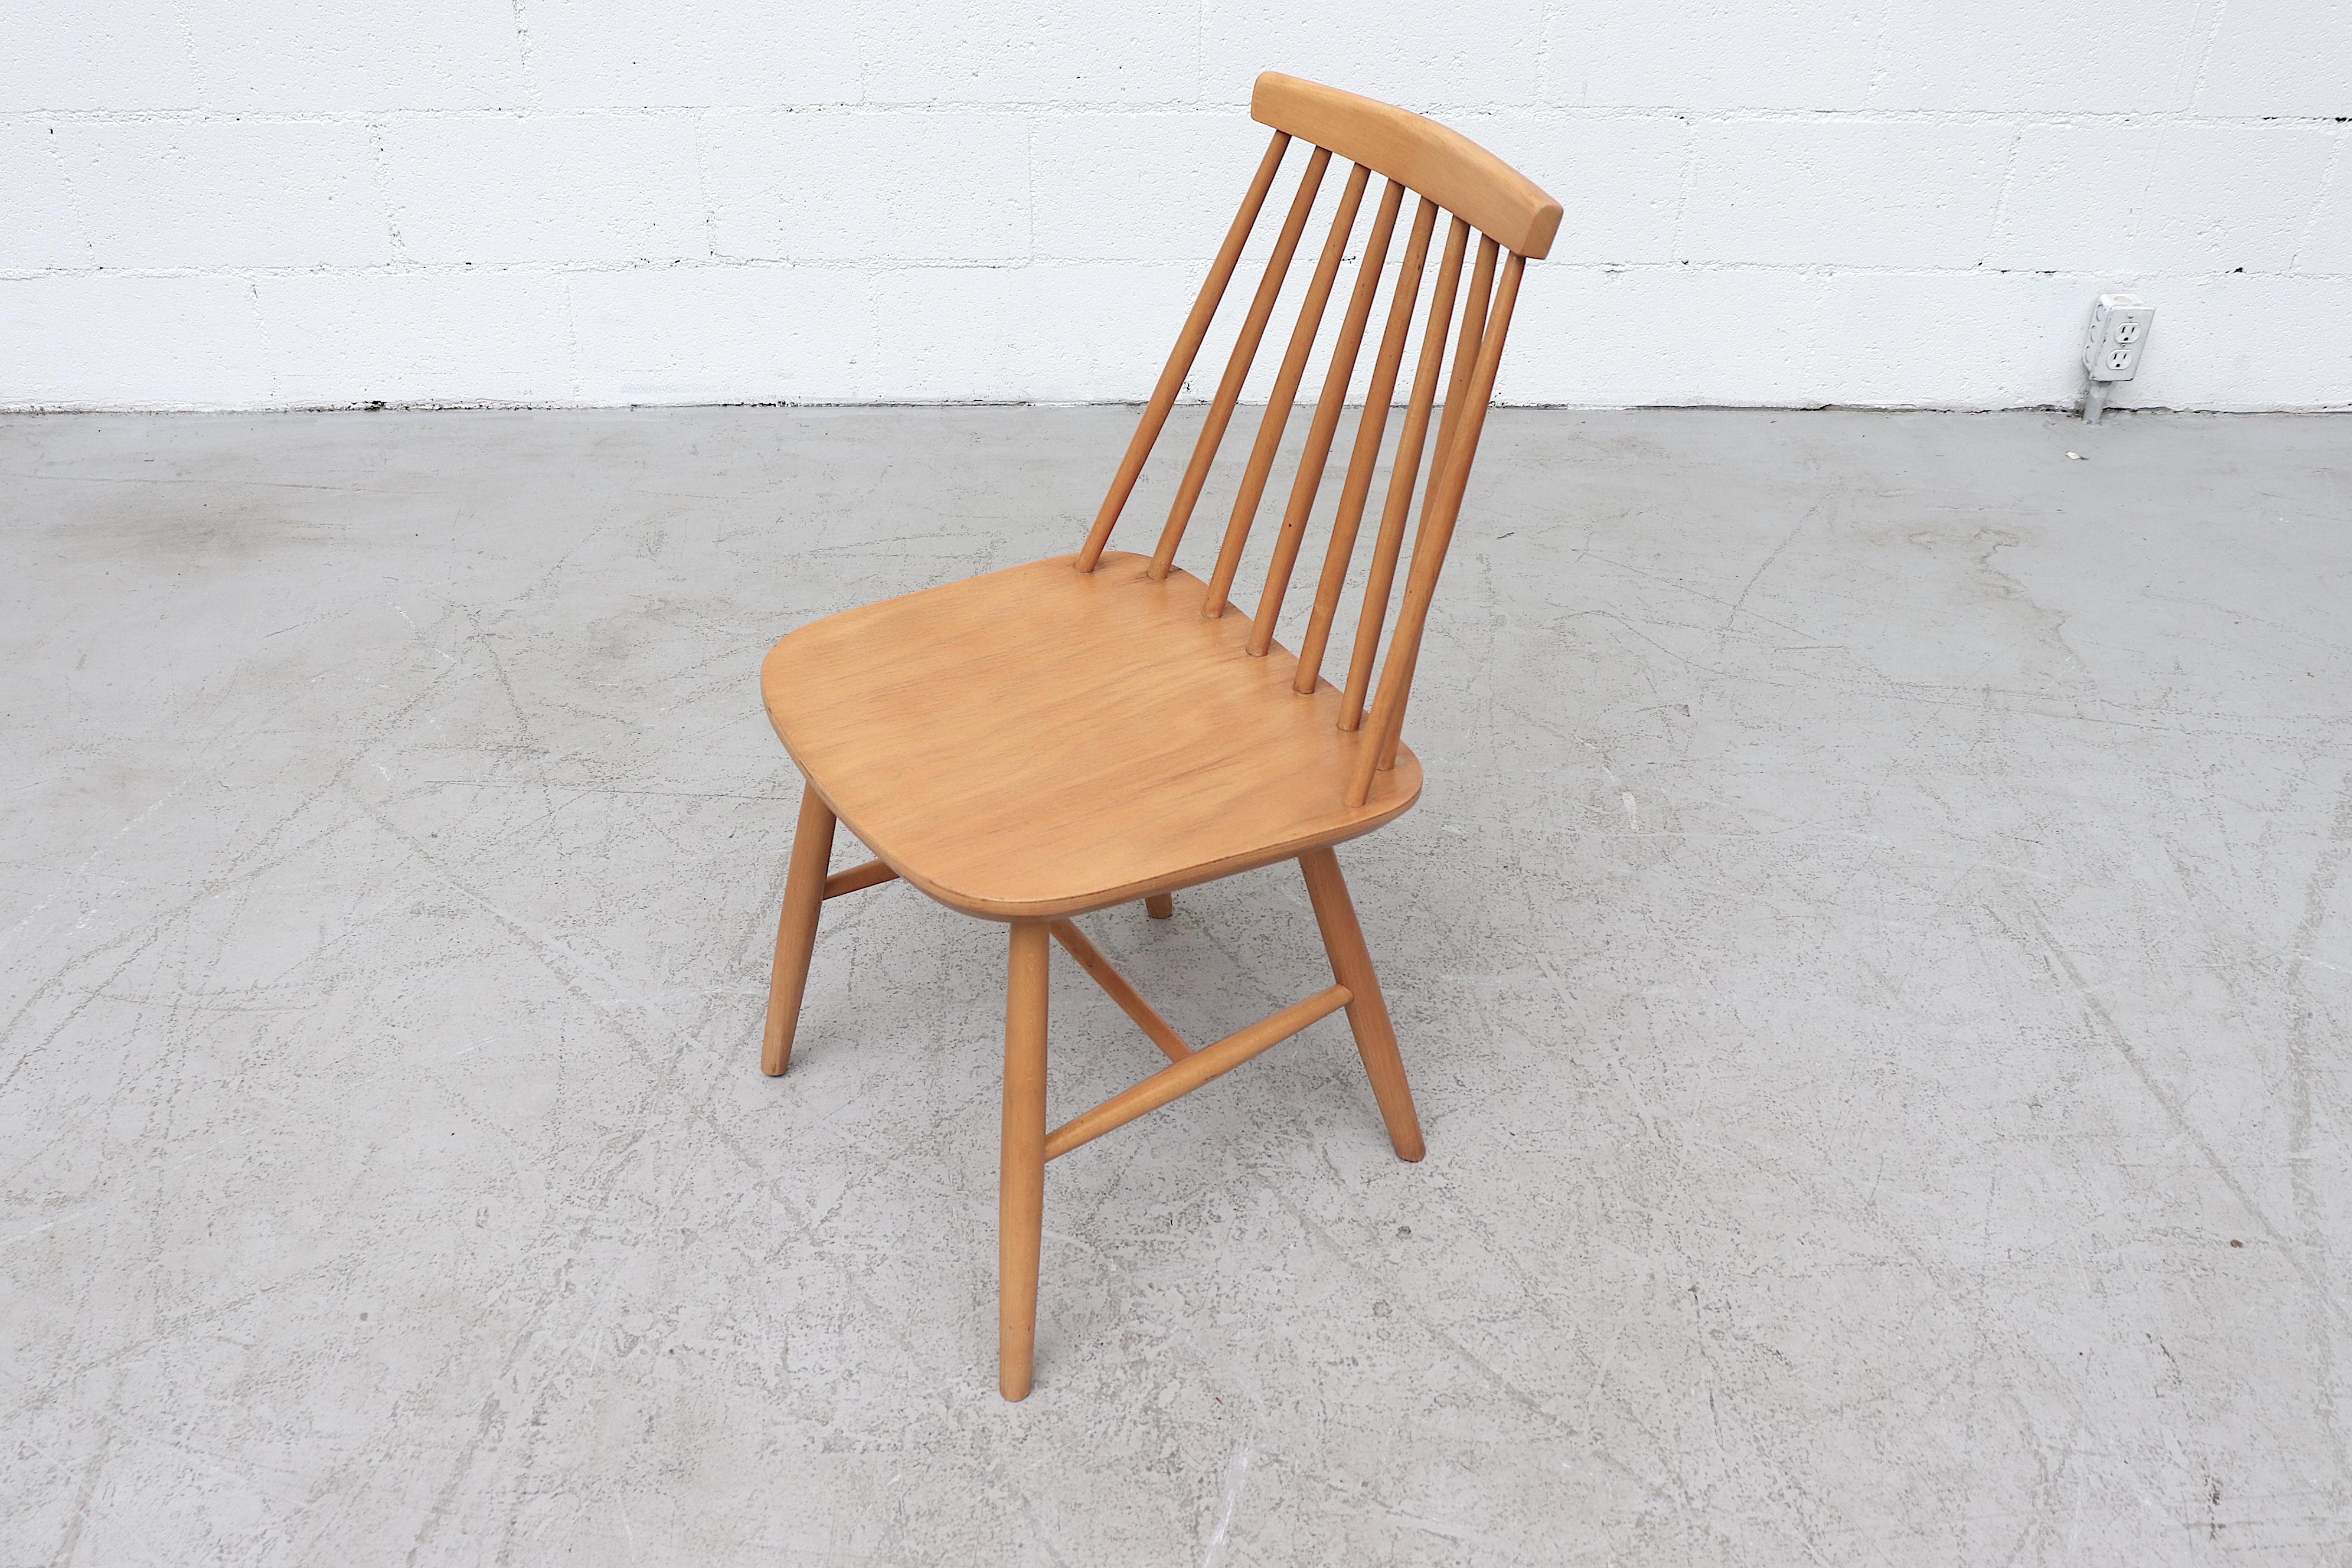 Mid-20th Century Blonde Tapiovara Style Spindle Back Dining Chair